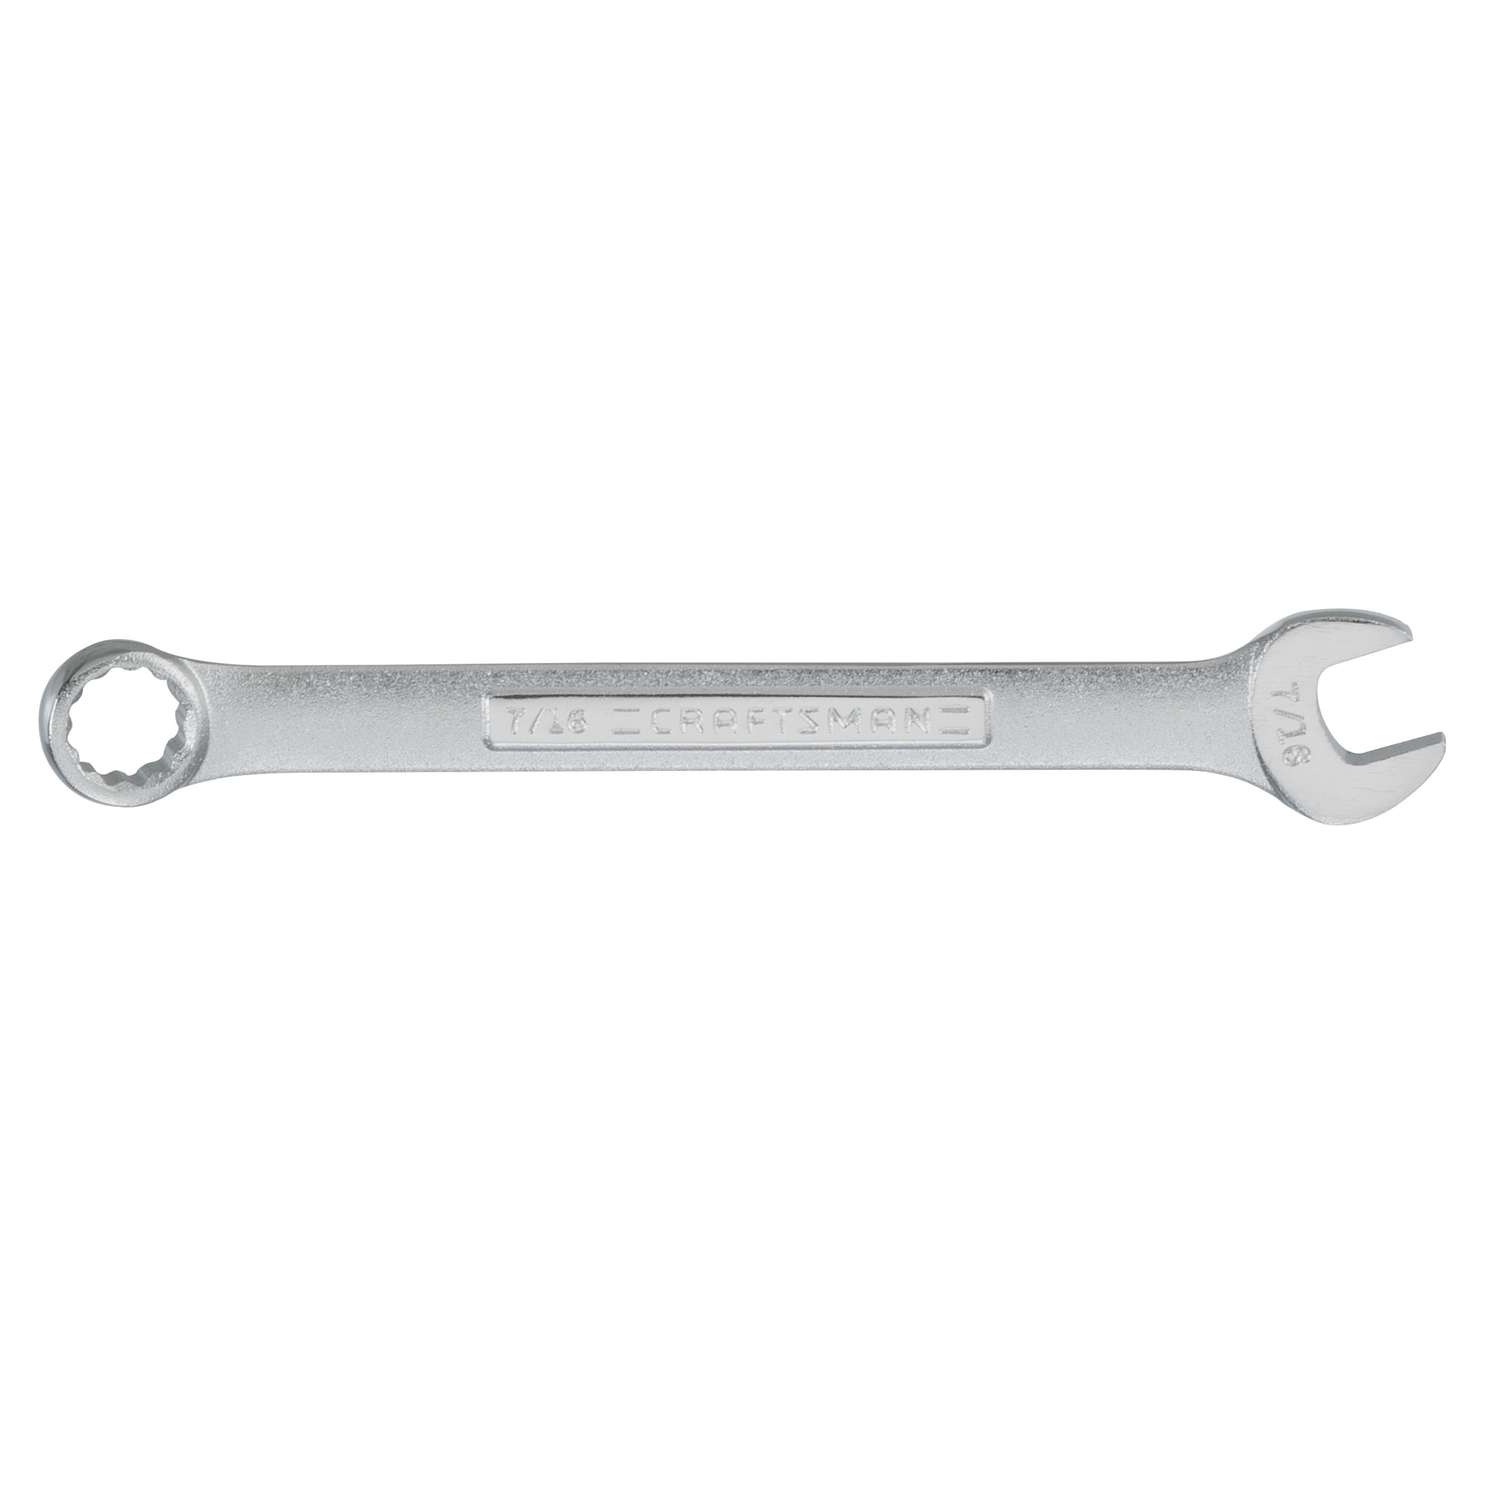 Craftsman Open End Wrench 1 1/2 x 1 5/8 inch 9-44589